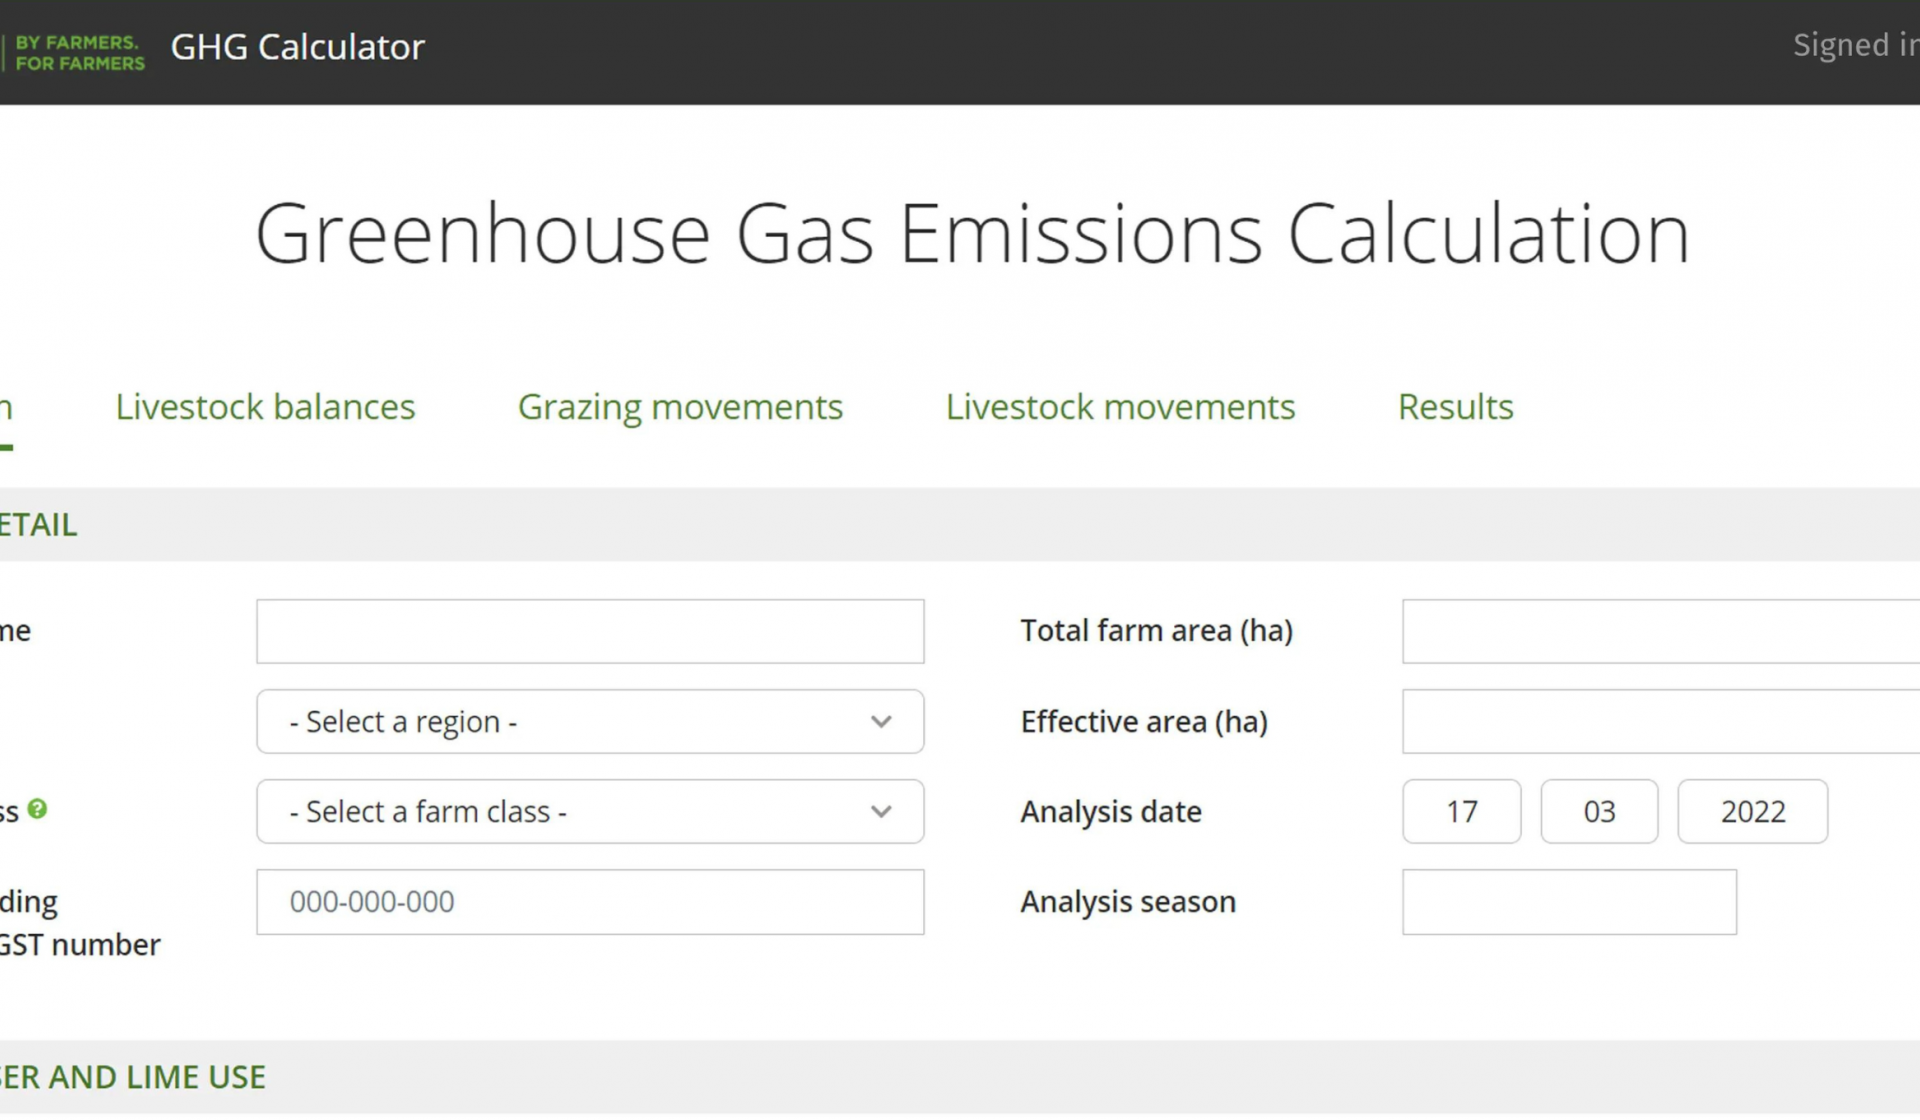 Screenshot of Beef + Lamb CHG Caluculator Greenhouse Gas Emissions Calculation with the options to fill in the details about your farm